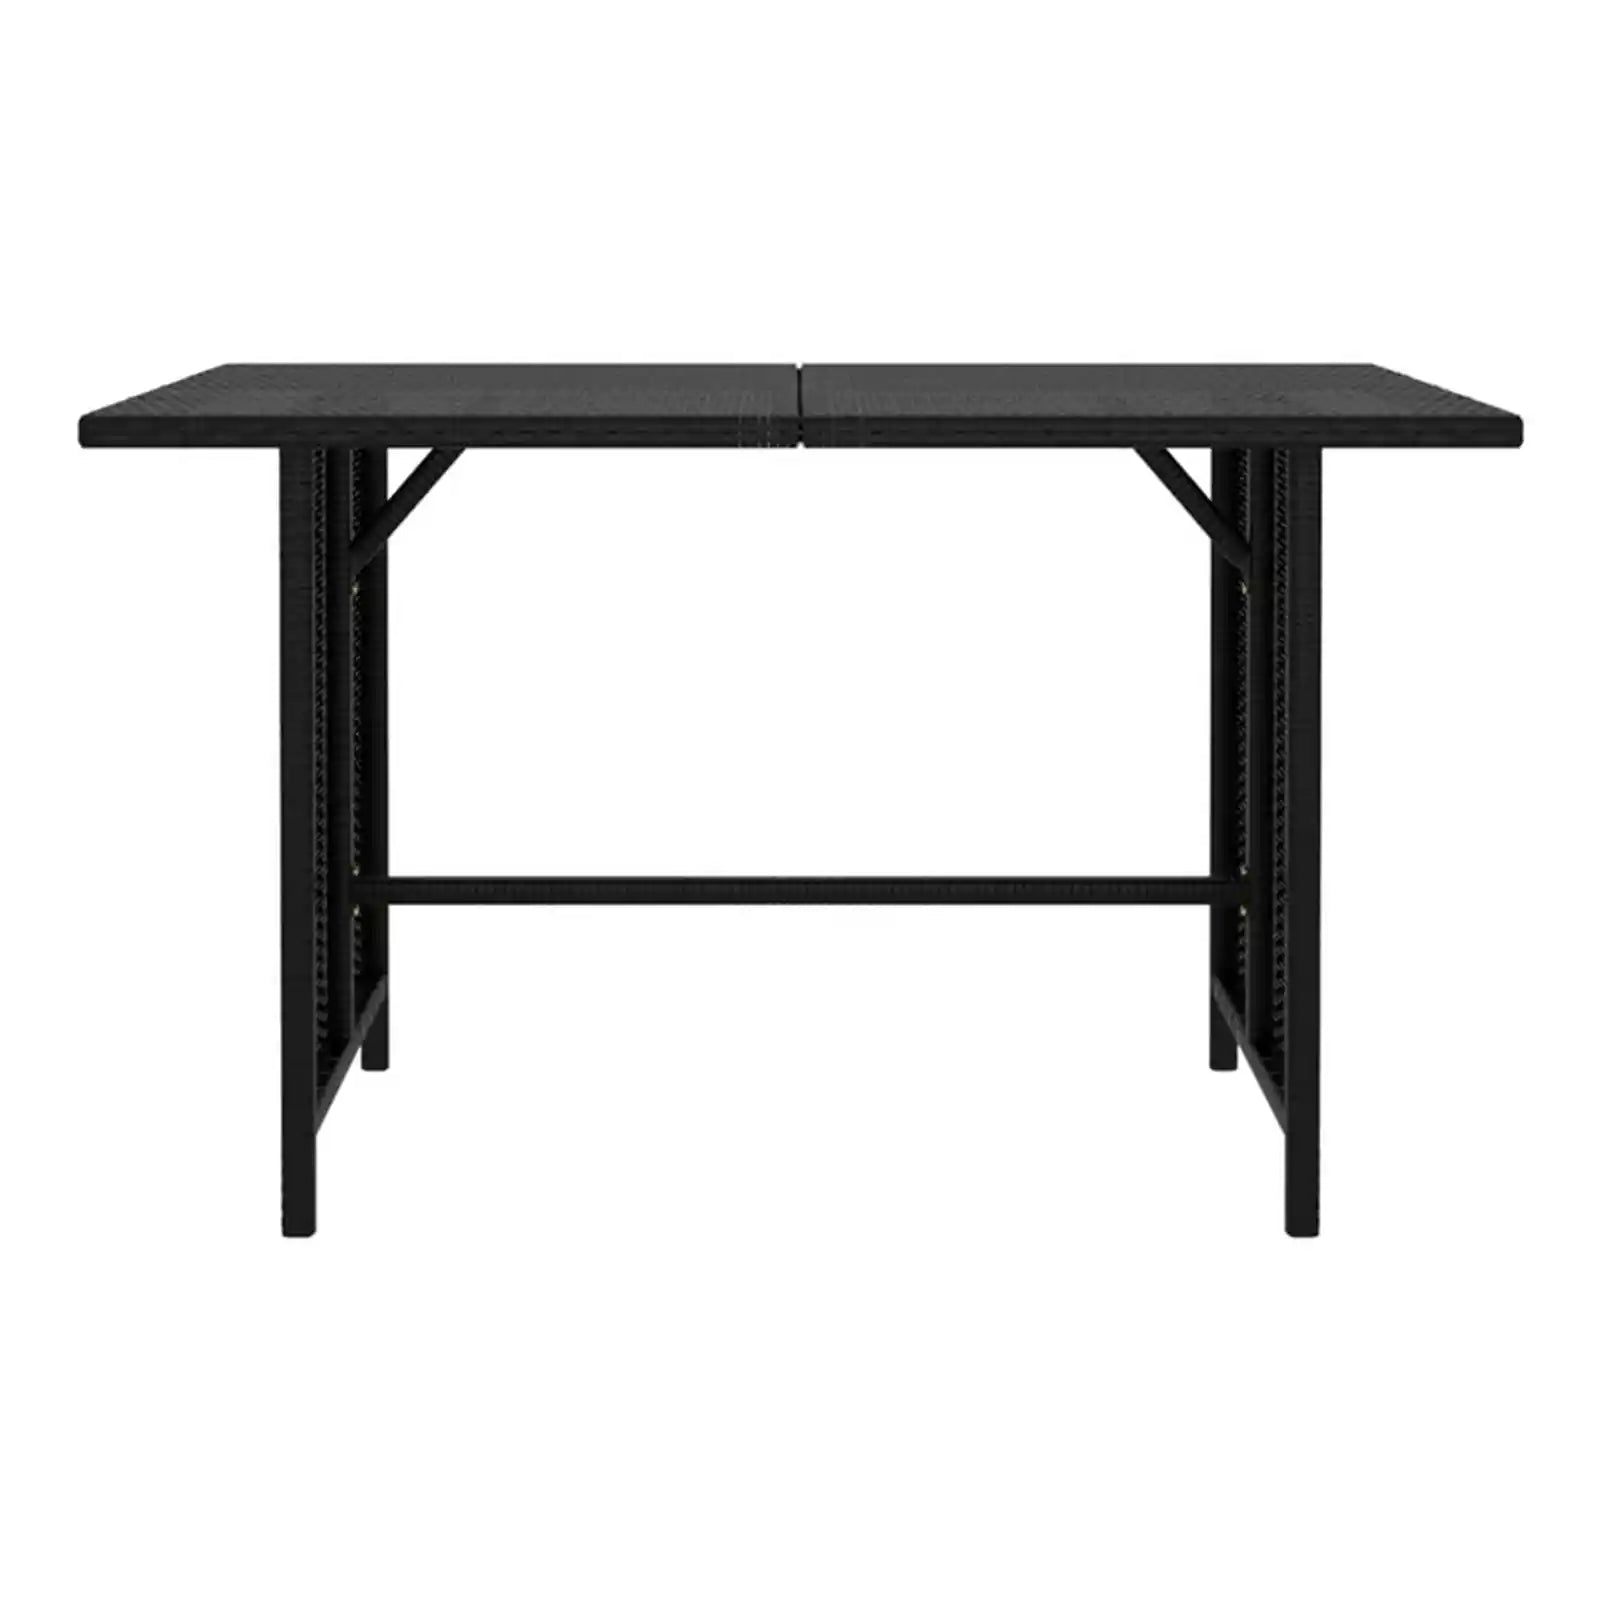 Modern Black Patio Dining Table for Outdoor